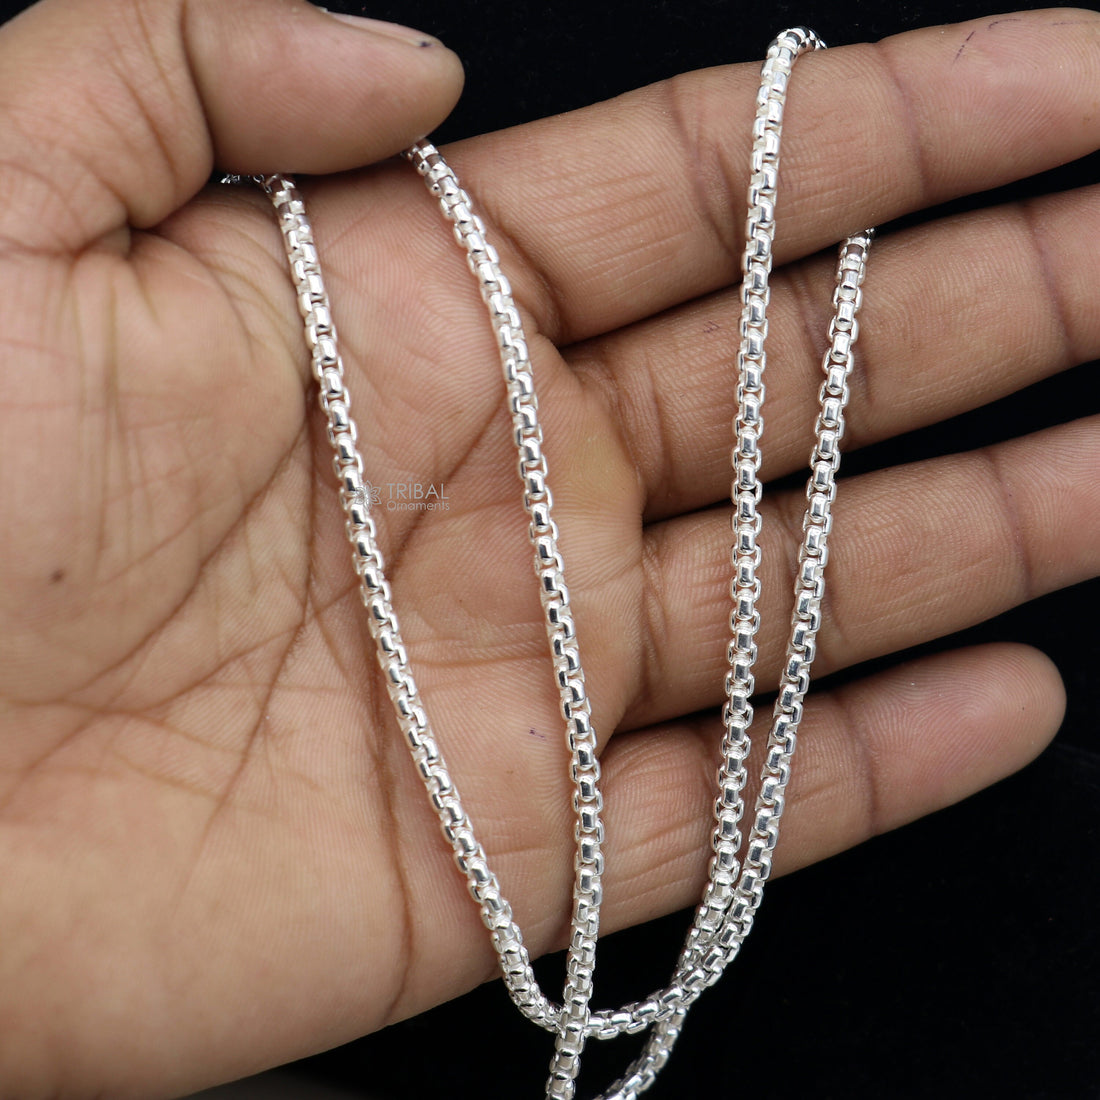 Solid 925 Sterling Silver Rolo Link Chain Necklace 3 mm - Handmade - Unique  Bismark Style Design - Oxidized Non Tarnish Chains for Men Women 22 24